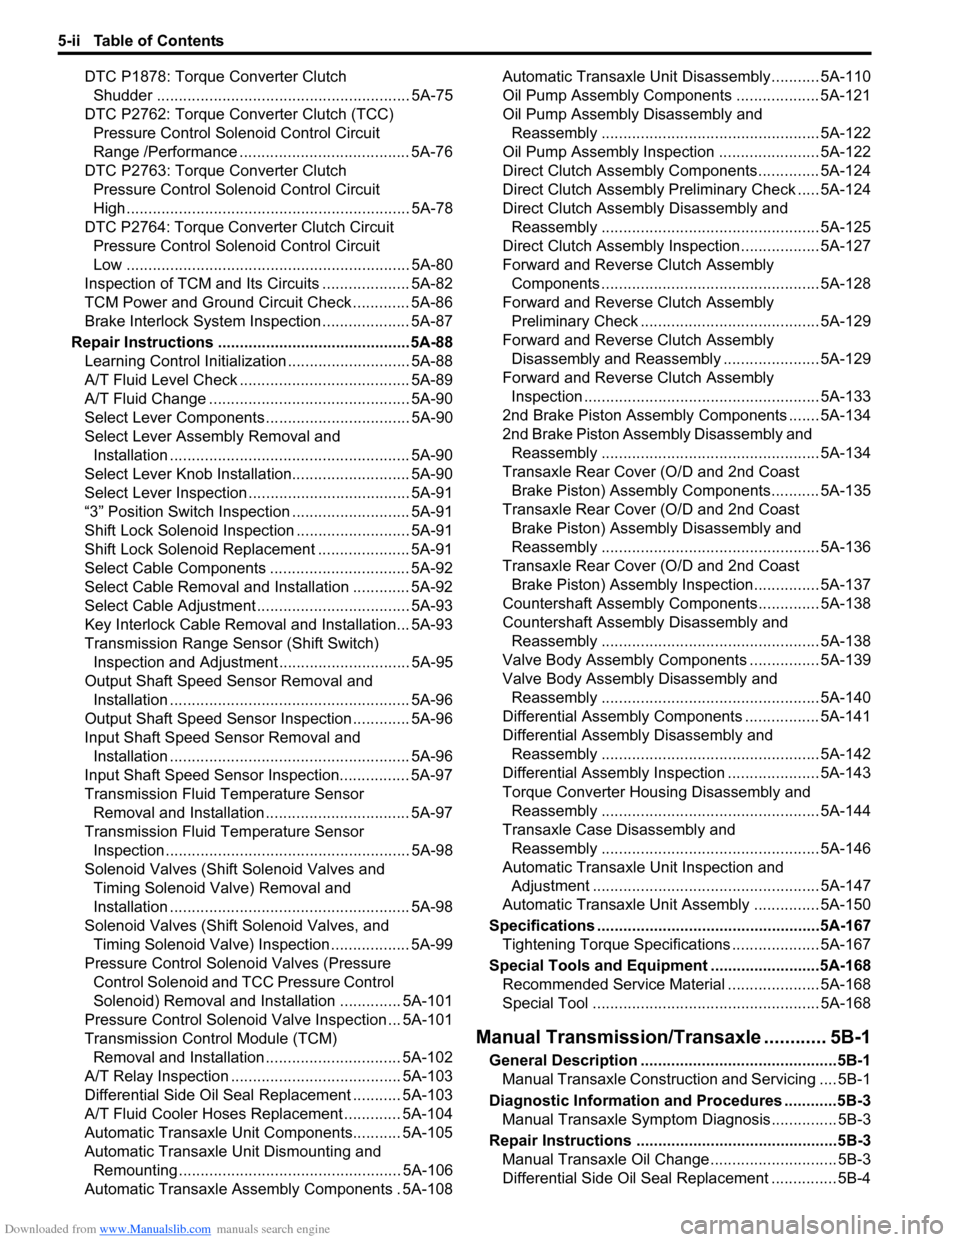 SUZUKI SWIFT 2007 2.G Service Service Manual Downloaded from www.Manualslib.com manuals search engine 5-ii Table of Contents
DTC P1878: Torque Converter Clutch Shudder .......................................................... 5A-75
DTC P2762: T